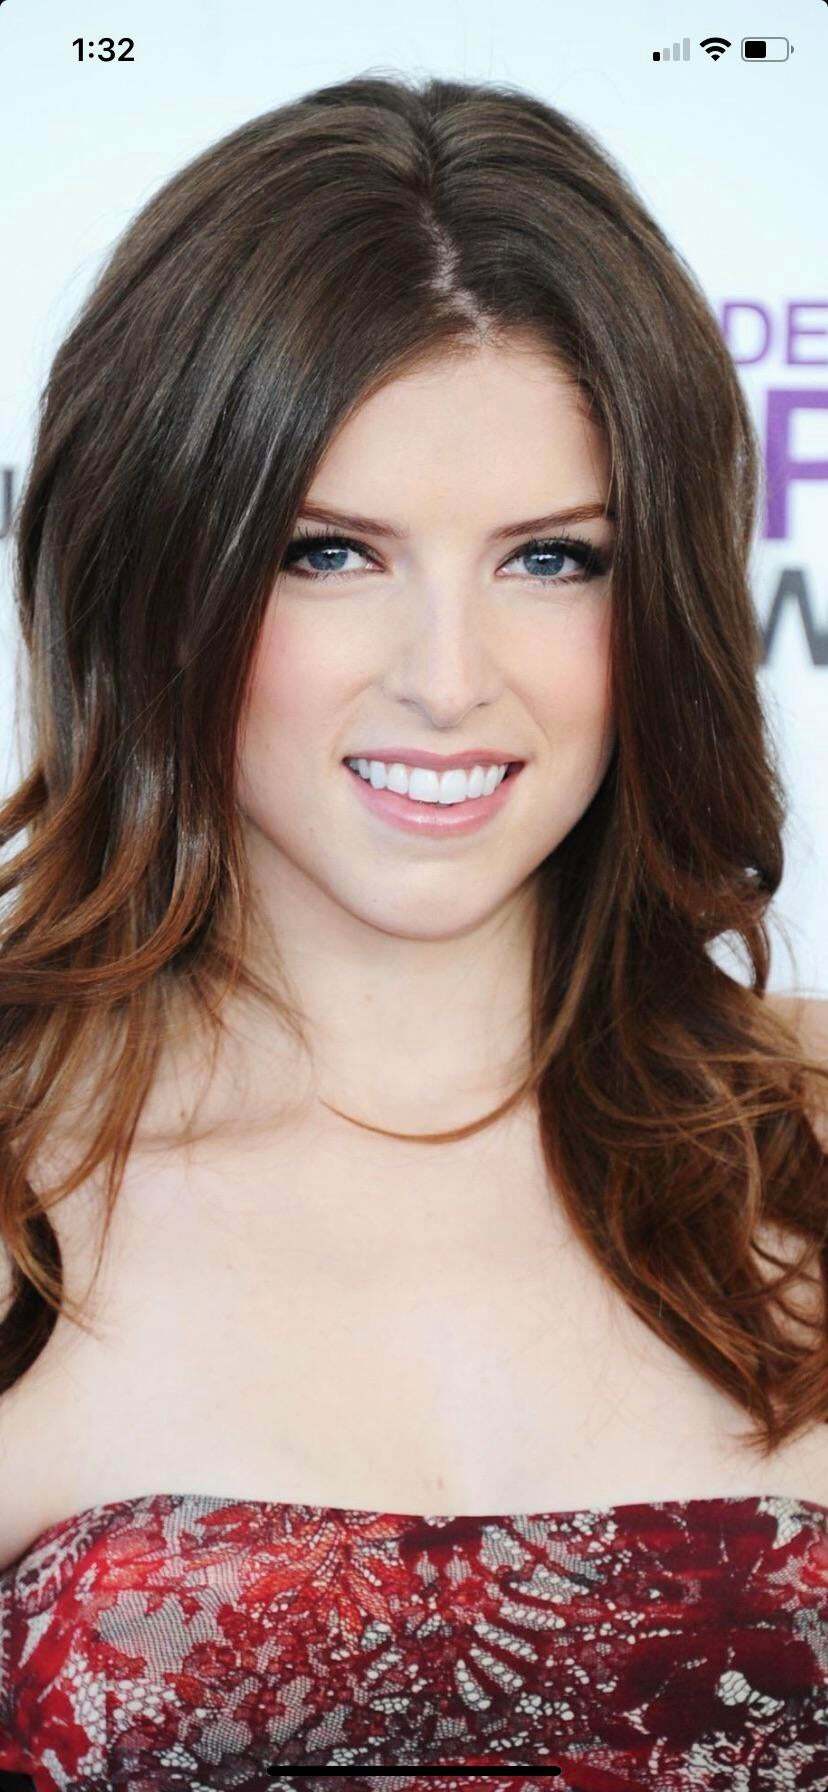 Anna Kendrick is cute but insanely sexy at the same time, She would definitely be able to ride a cock like a pro